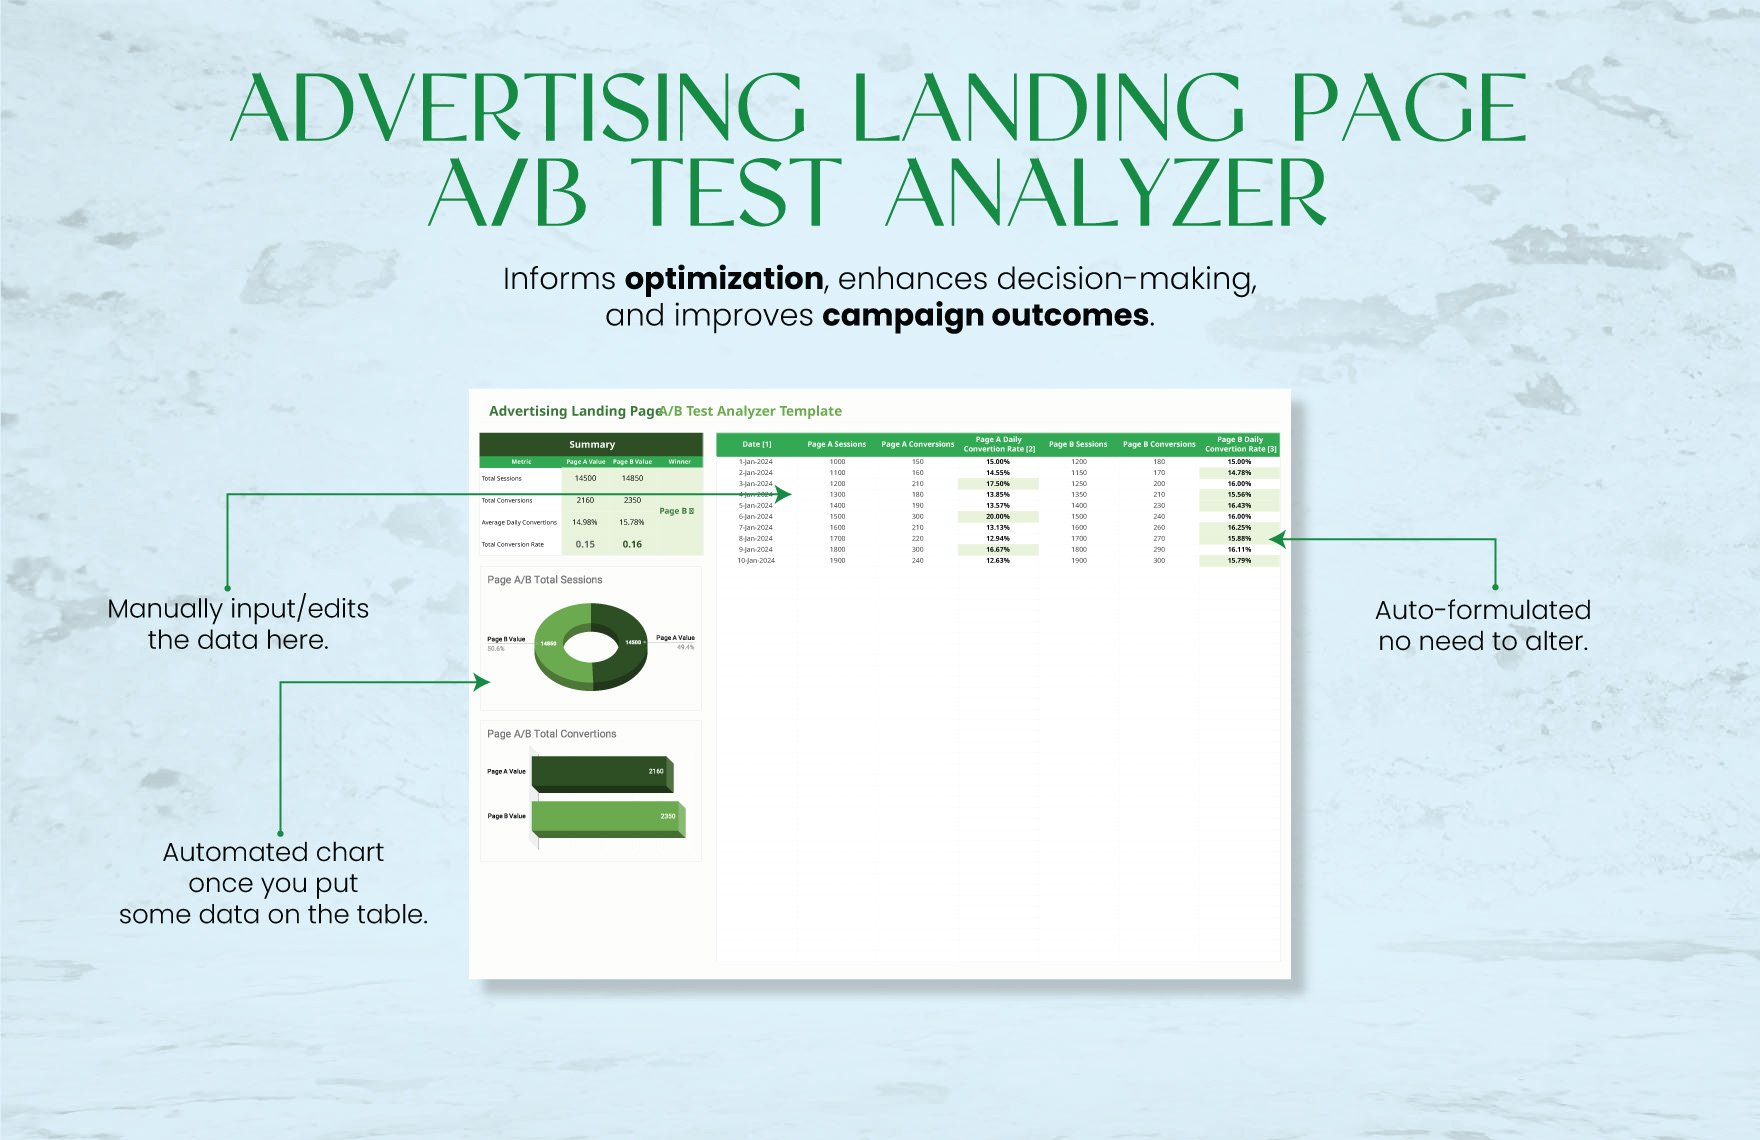 Advertising Landing Page A/B Test Analyzer Template